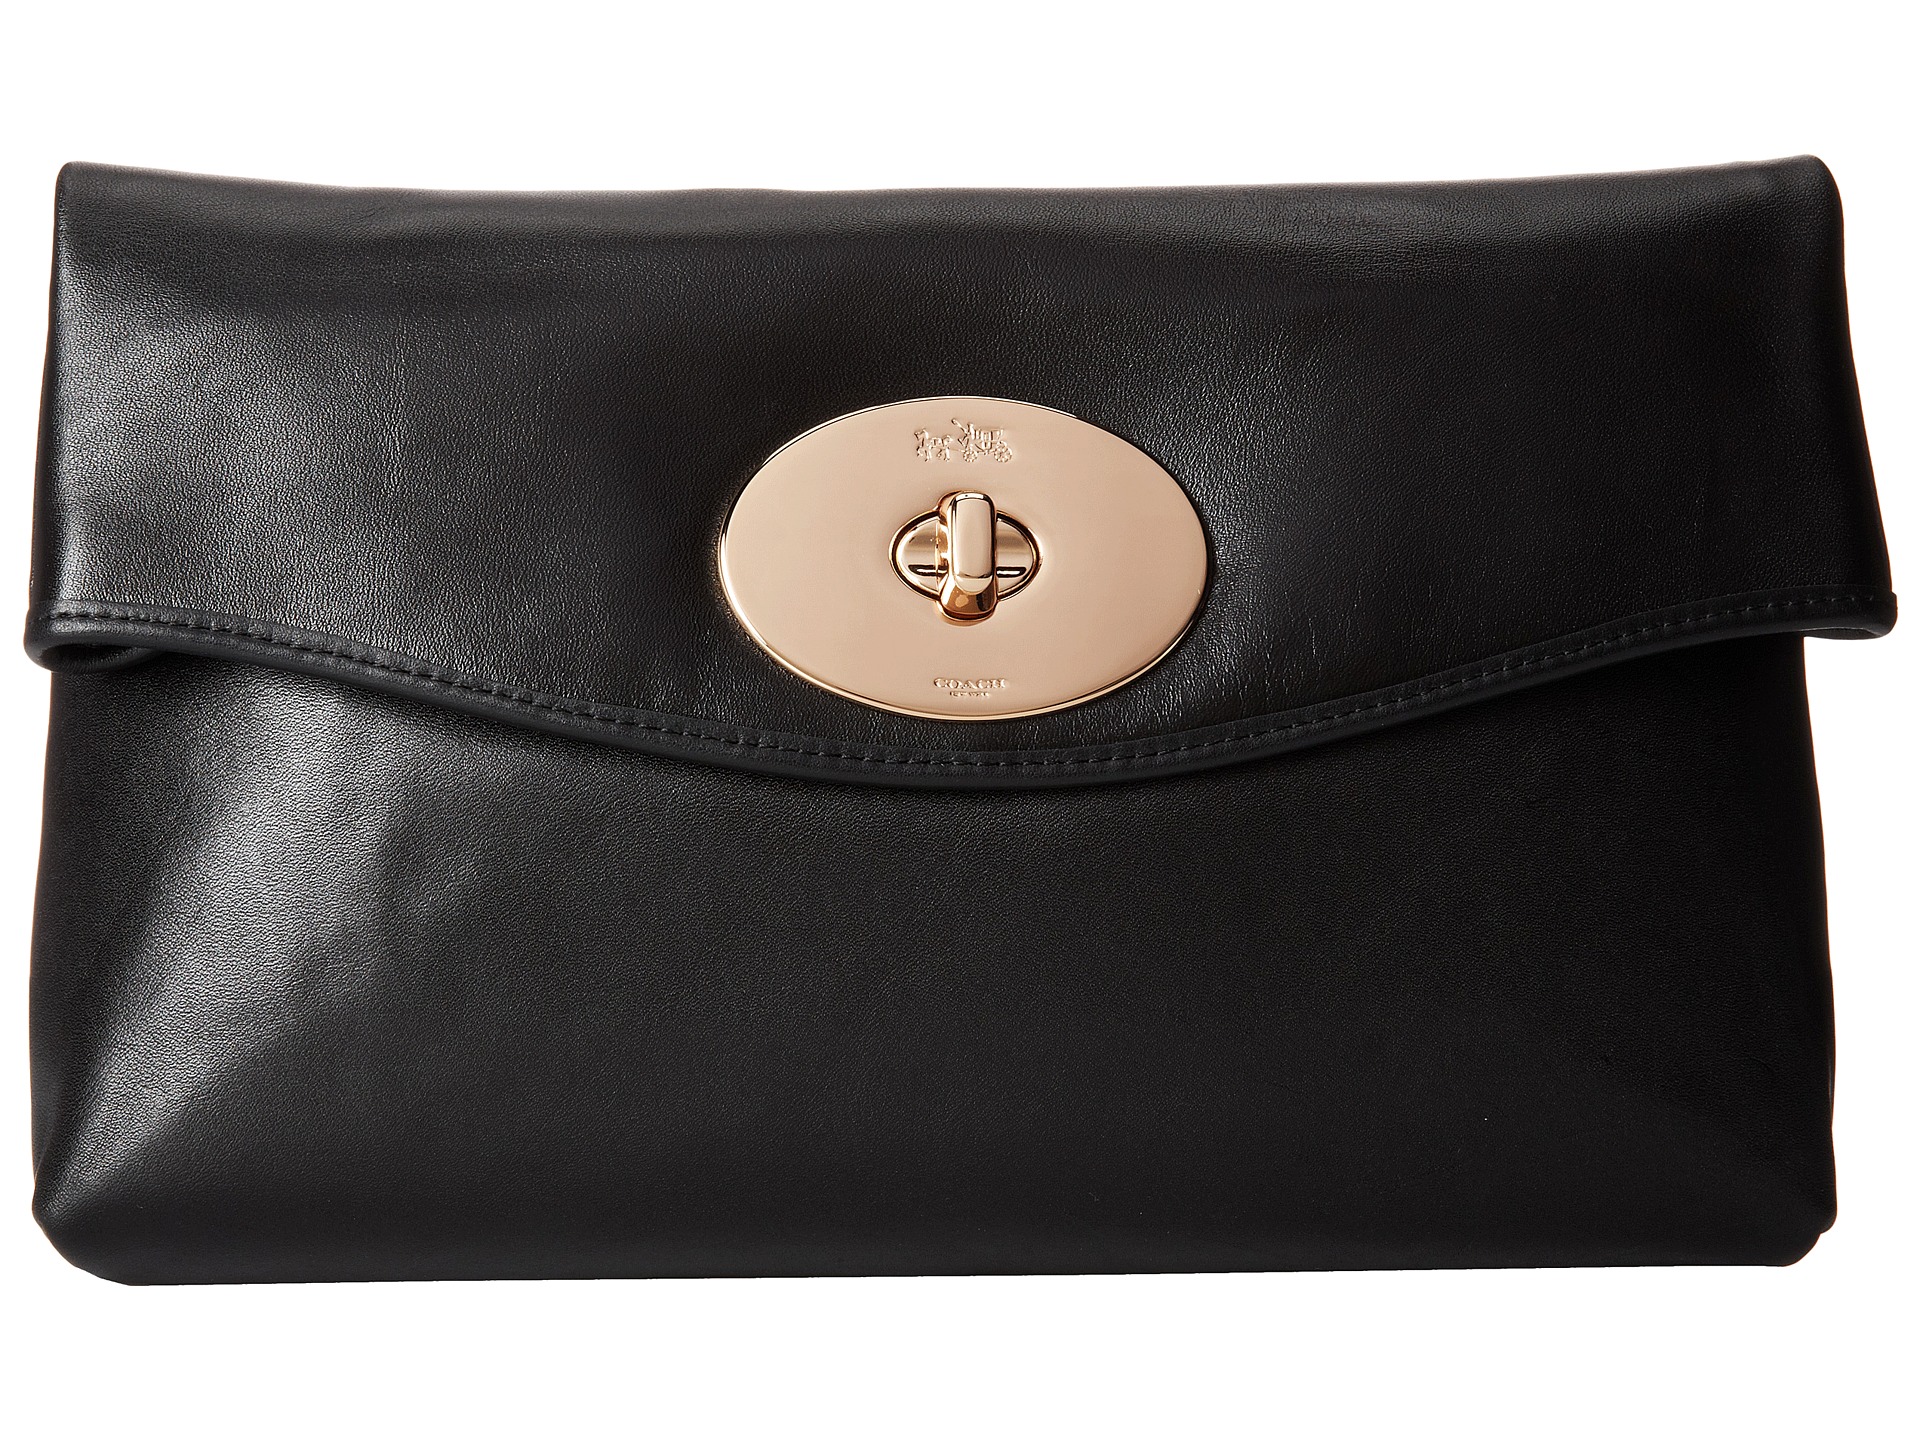 Coach Smooth Leather Turnlock Clutch Light Black | Shipped Free at Zappos